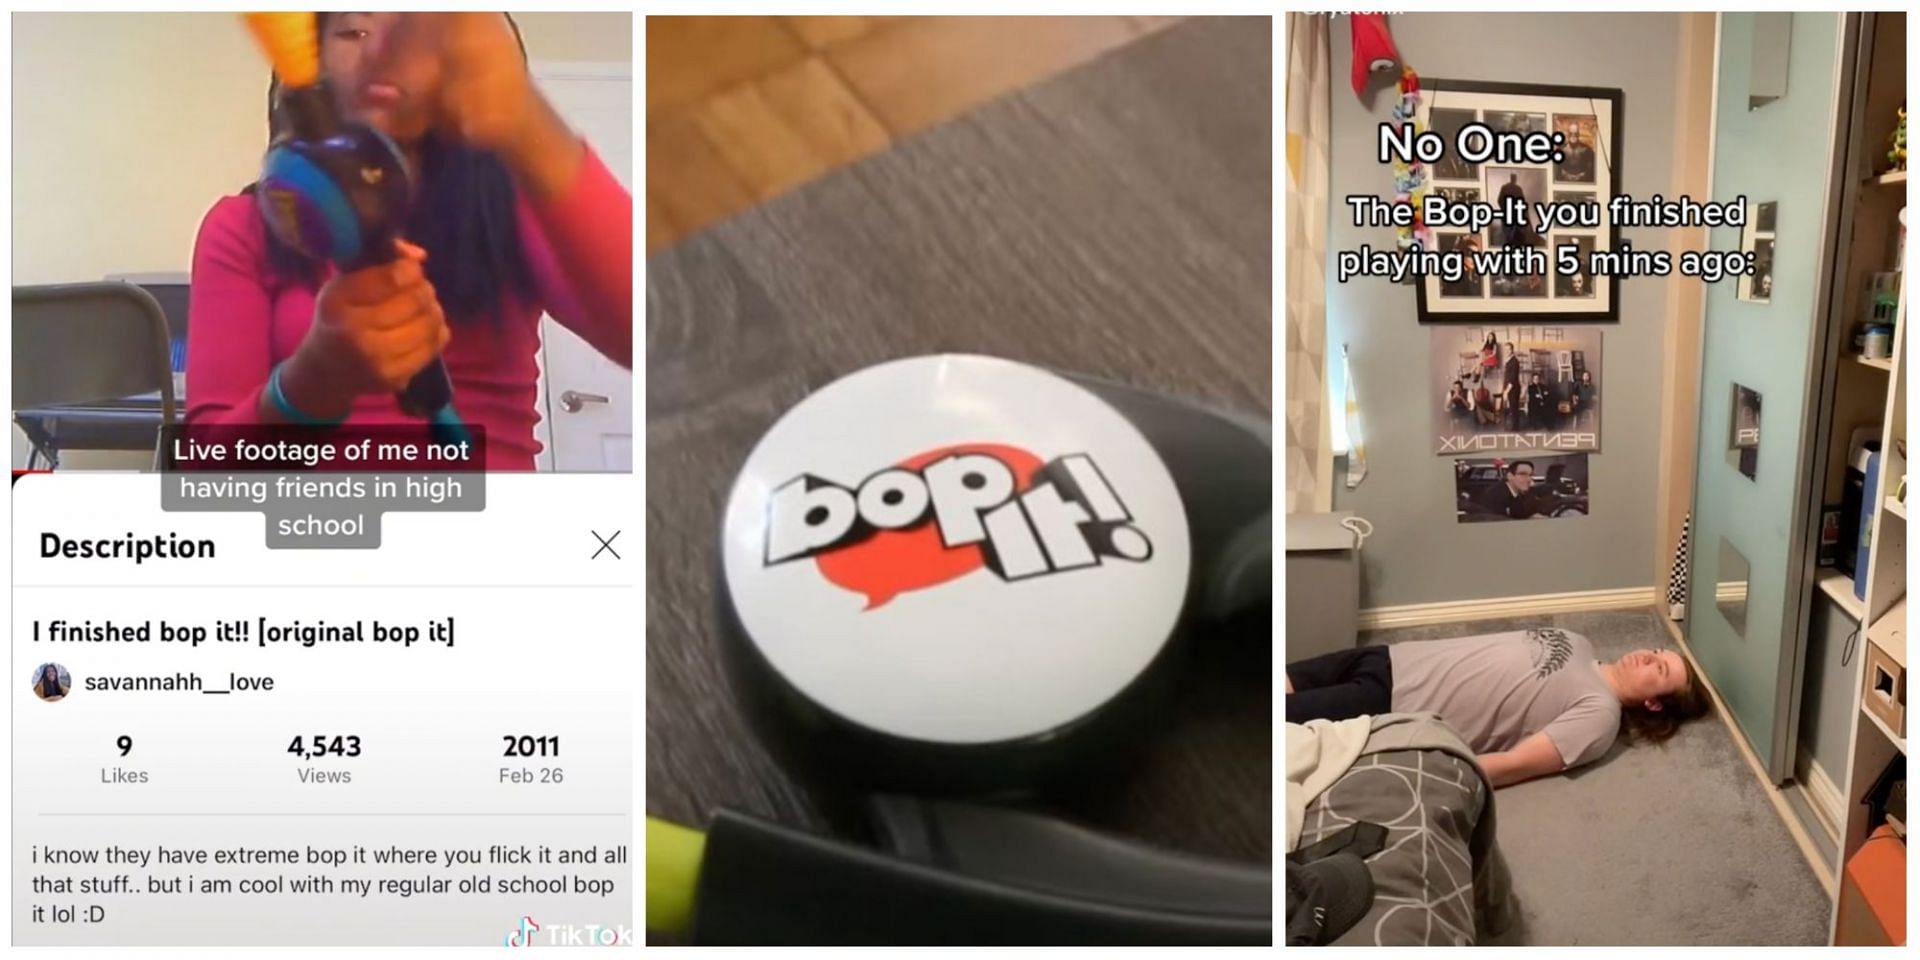 Now You Can Bop It, Pull It, Spin It, Twist It, And More On Your iPad